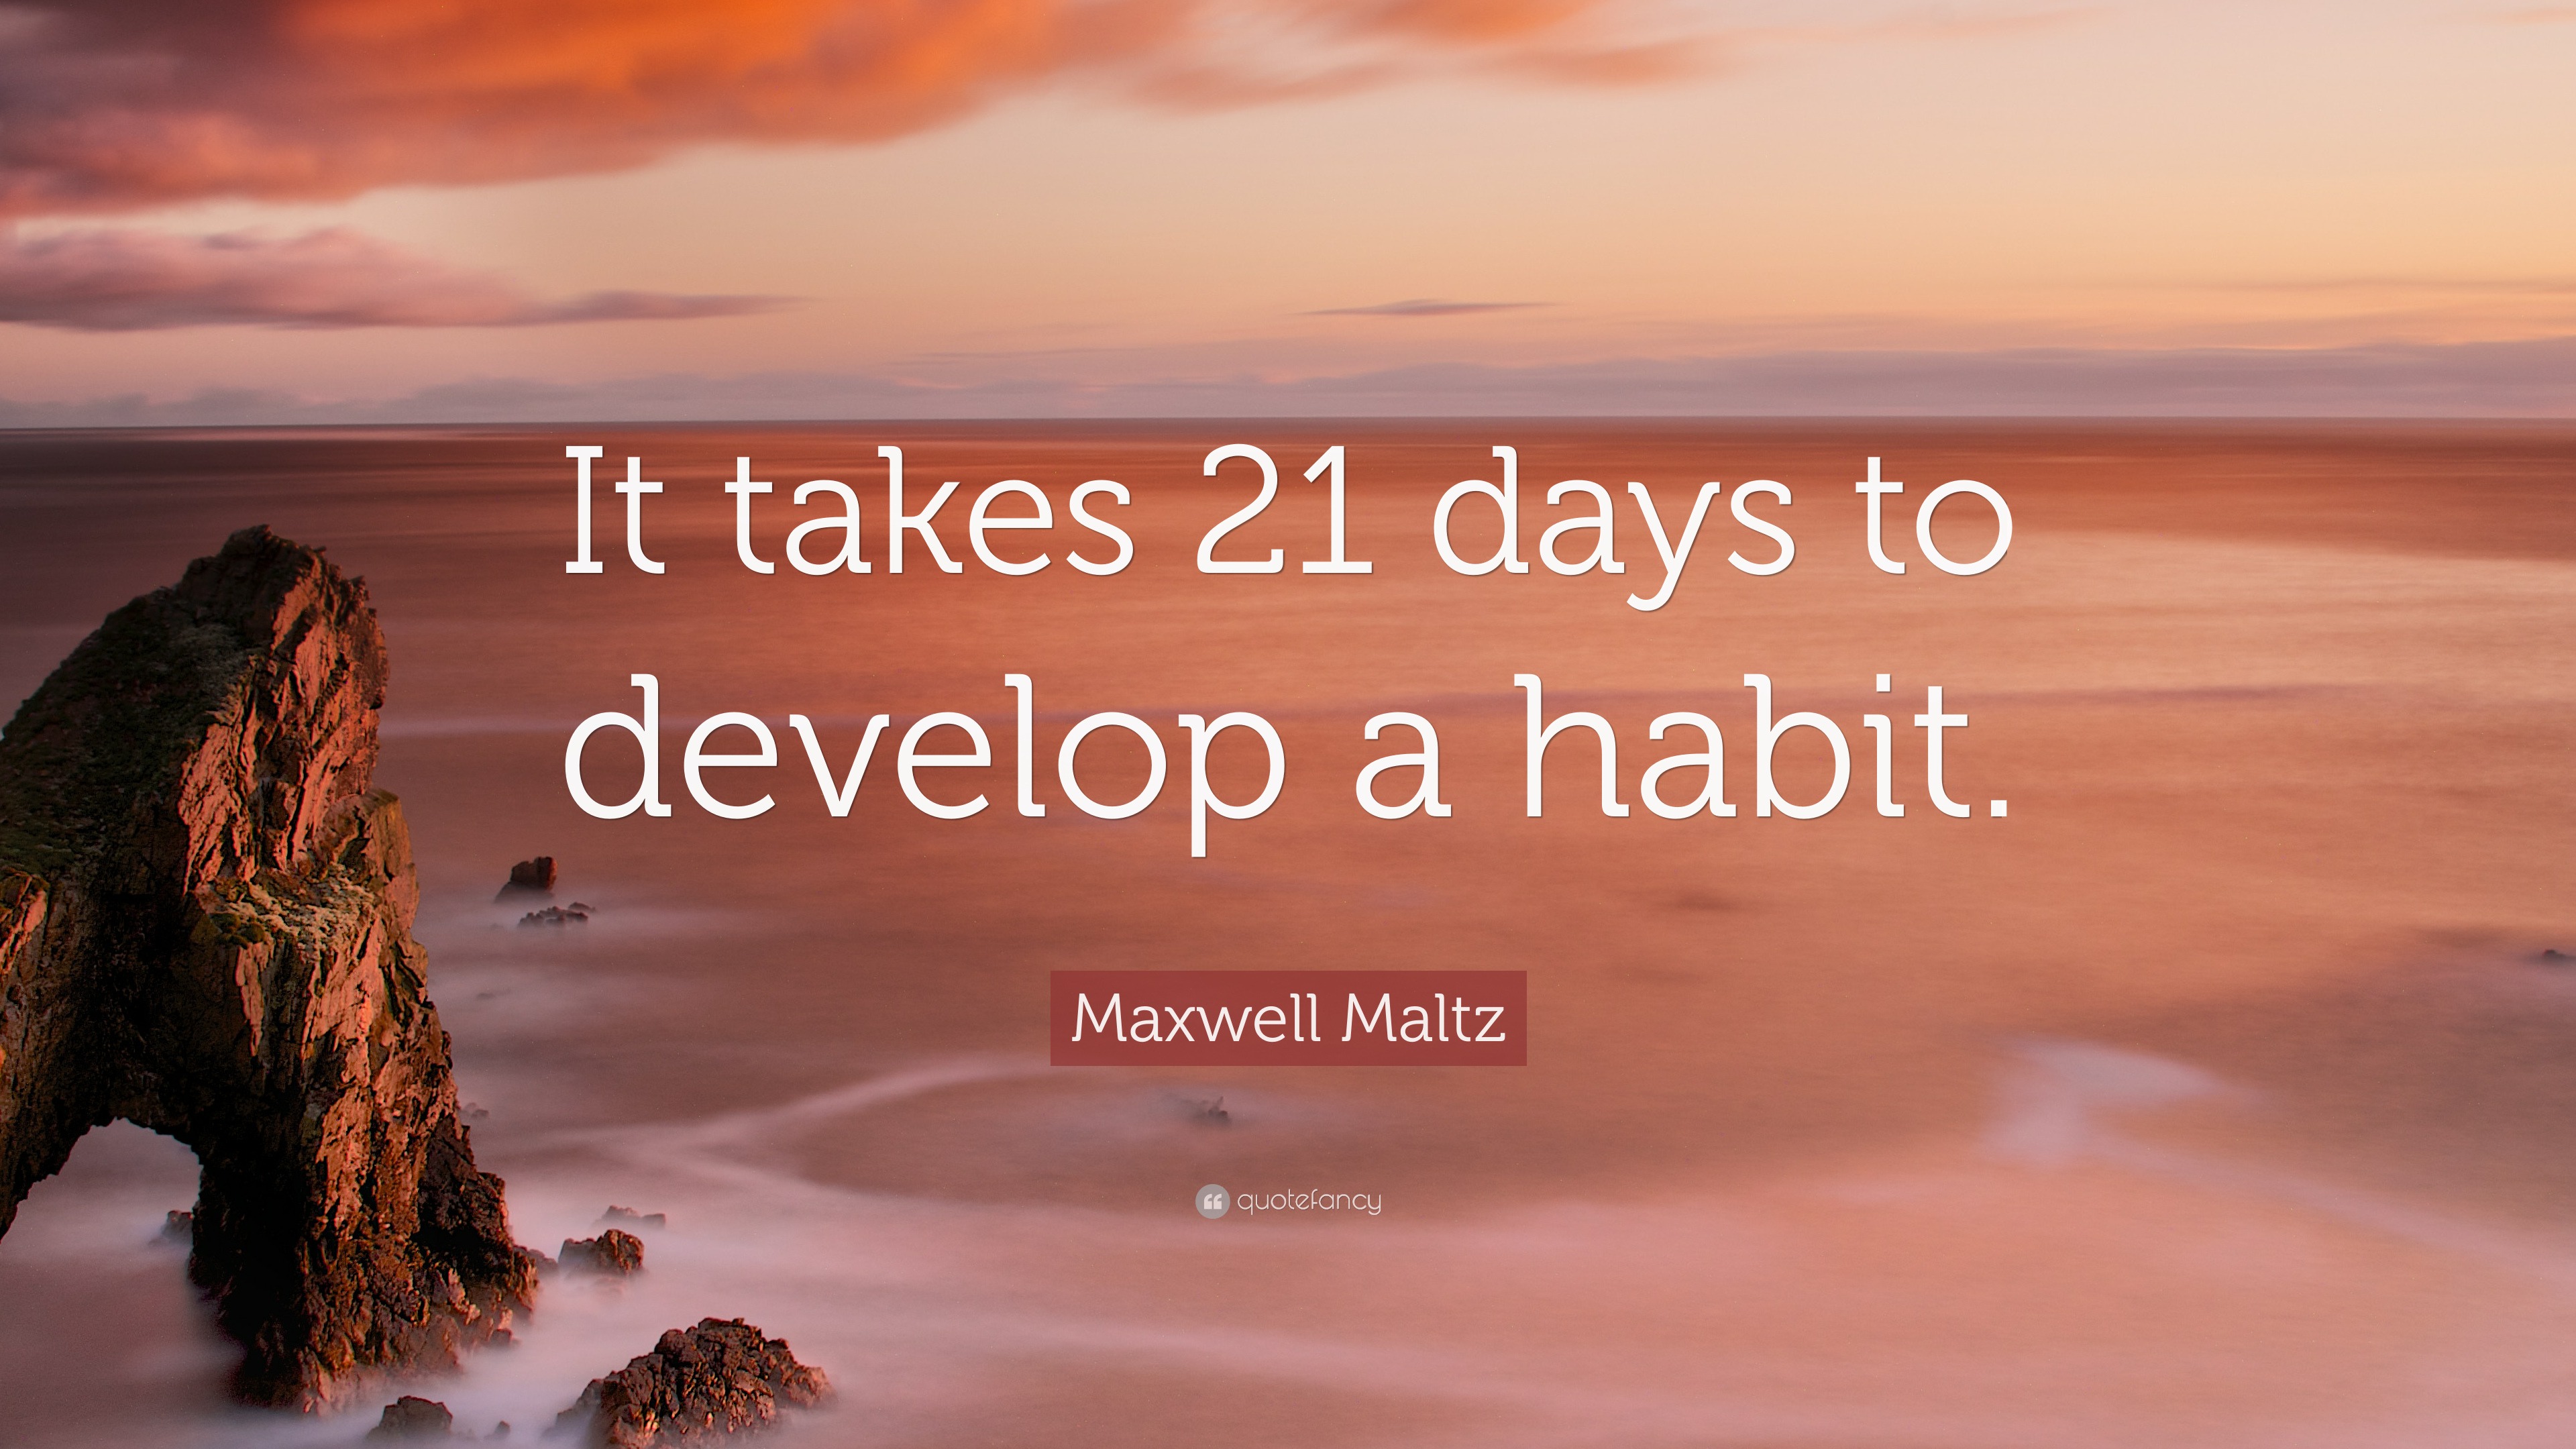 maxwell-maltz-quote-it-takes-21-days-to-develop-a-habit